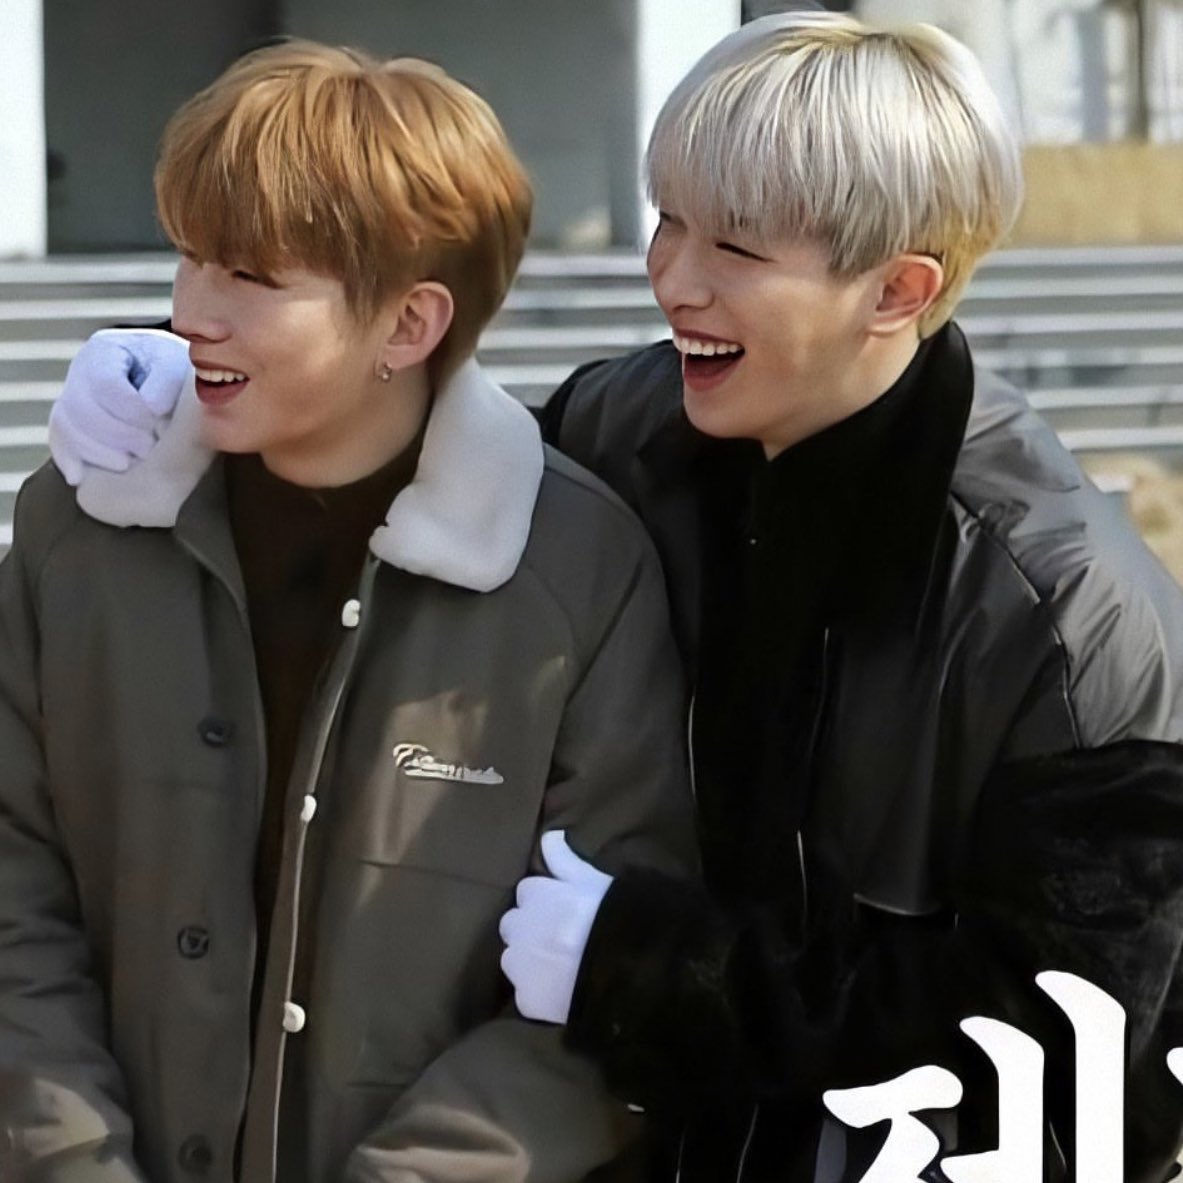 kiho- even though there’s a lil age difference they both look after eachother equally - composing genius and vocal legend - ‘he was cute and amazing, his smile was so pretty’ -wh